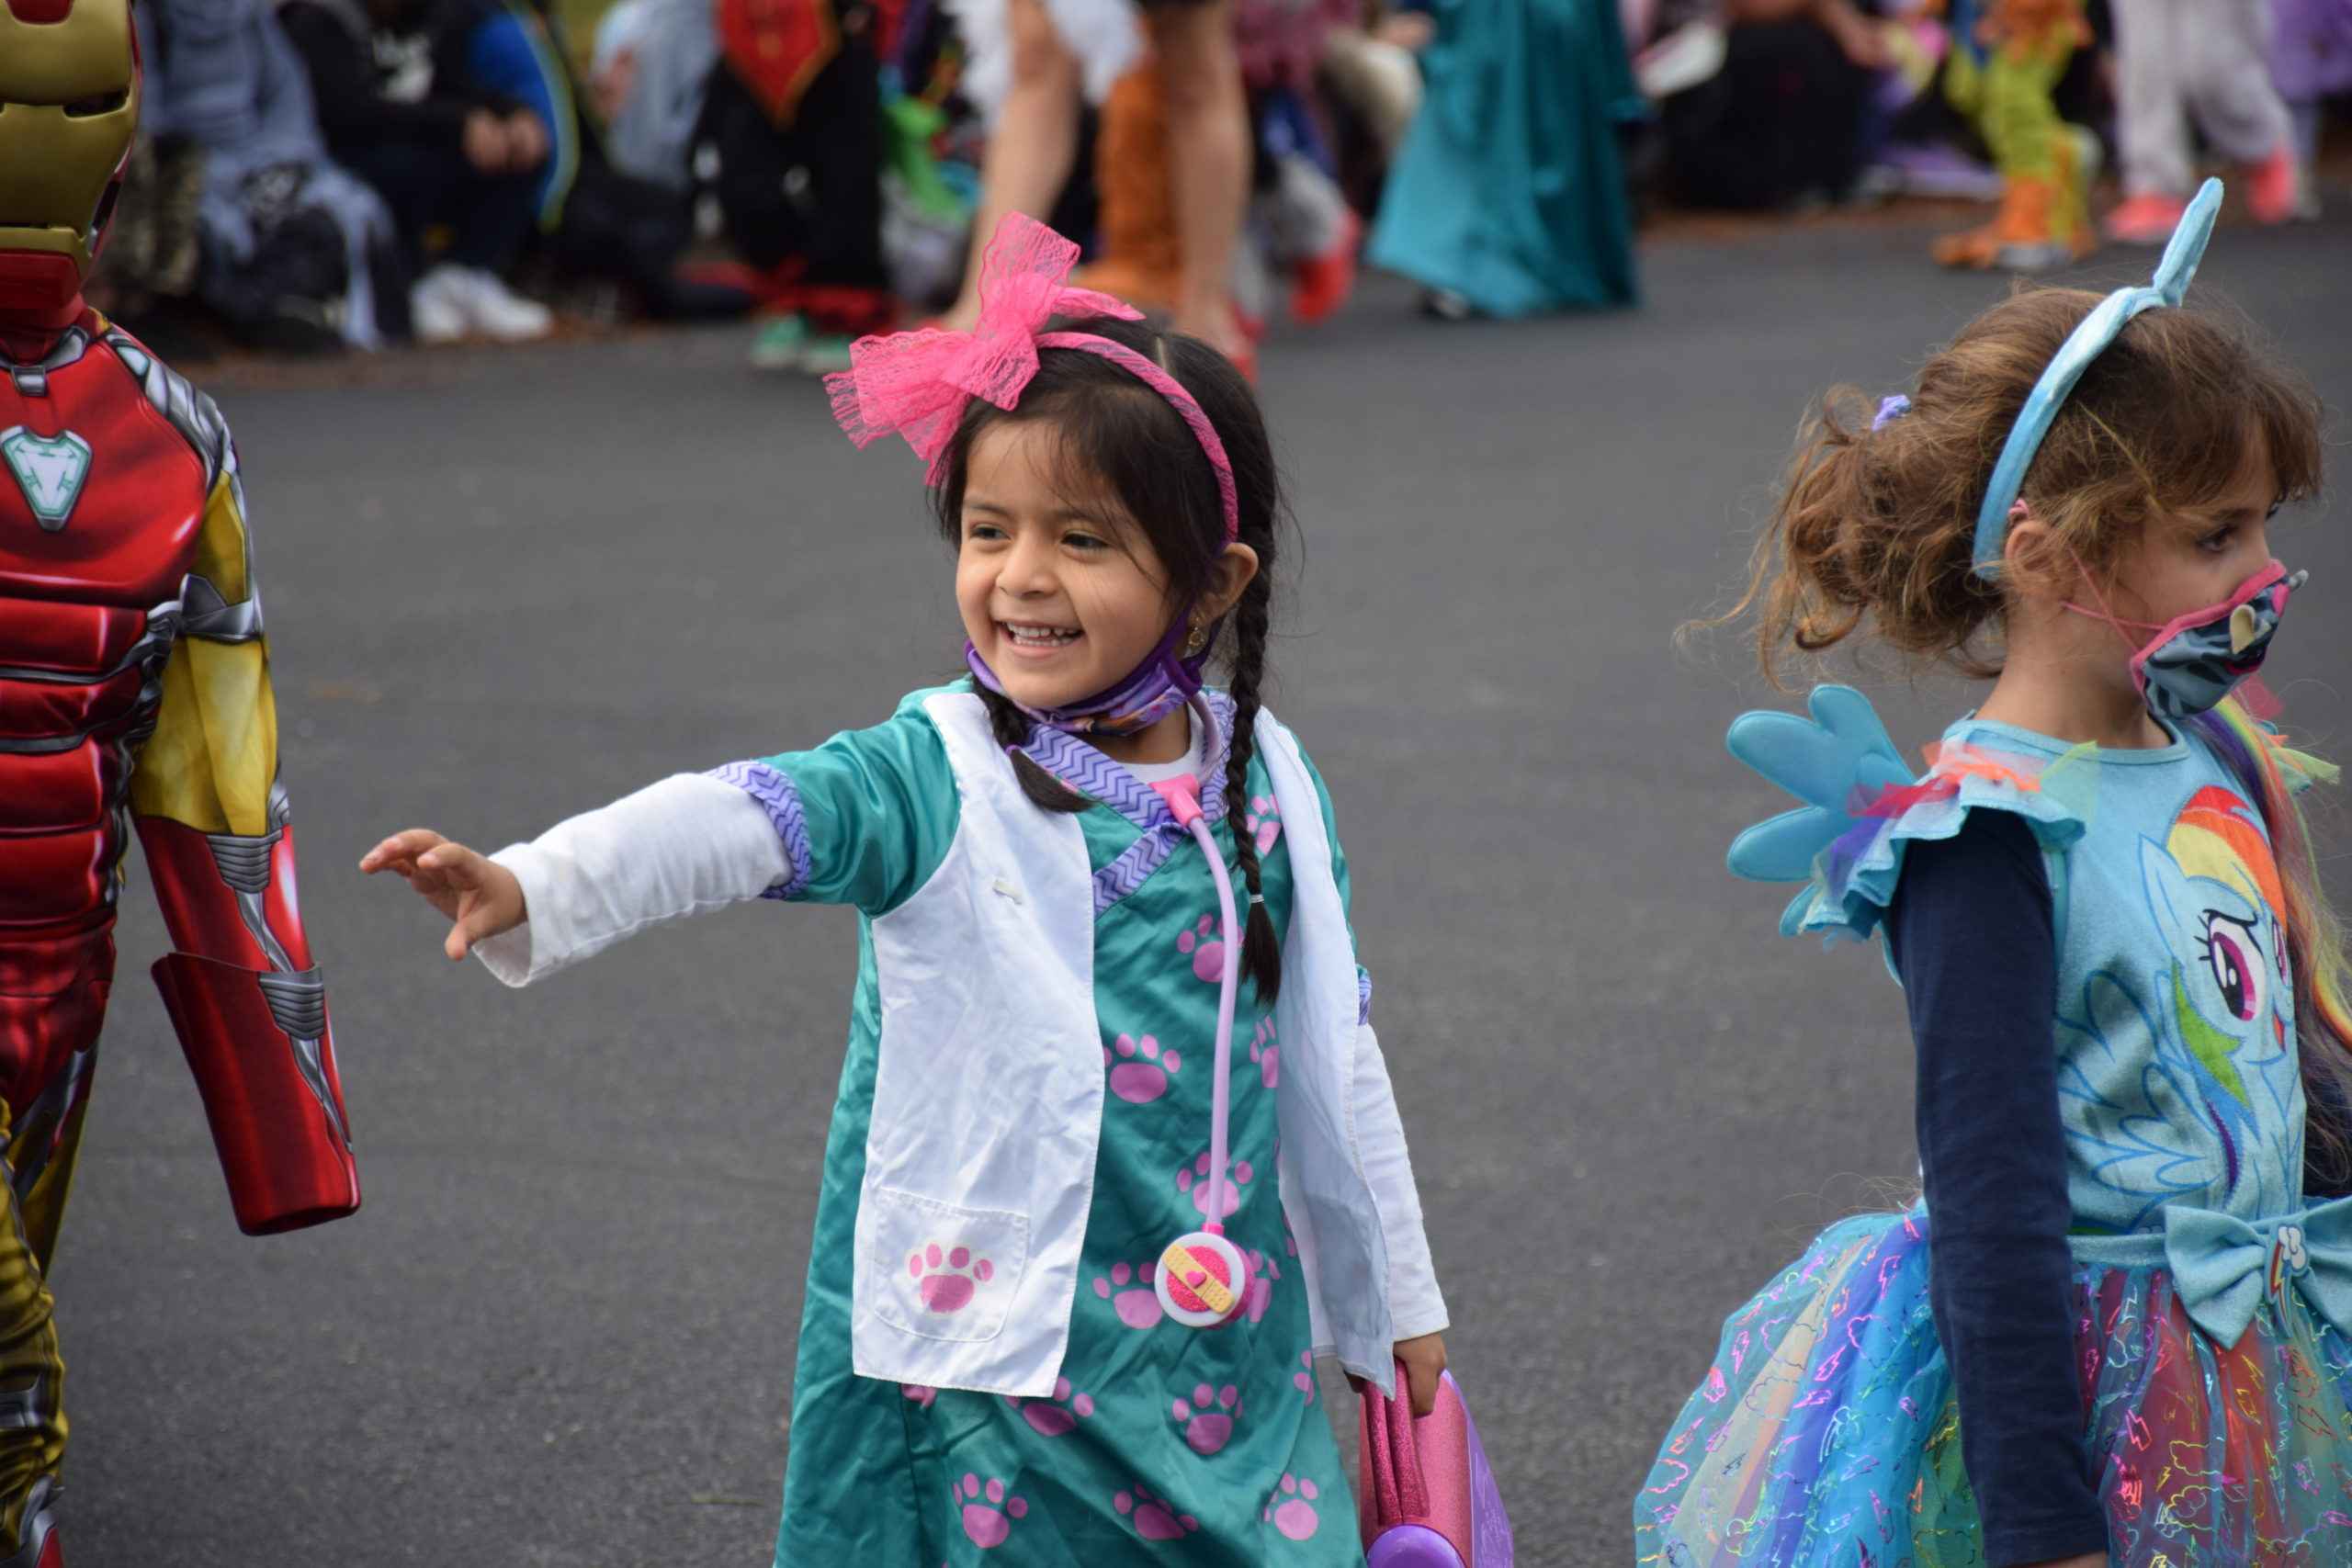 Wearing bright smiles and colorful costumes, Hampton Bays Elementary School students paraded around the school’s bus loop on October 29 for the school’s annual Harvest Parade. A crowd of onlookers cheered as the students — dressed as princesses, superheroes and spooky characters — marched and waved as the sounds of traditional Halloween music played in the background.